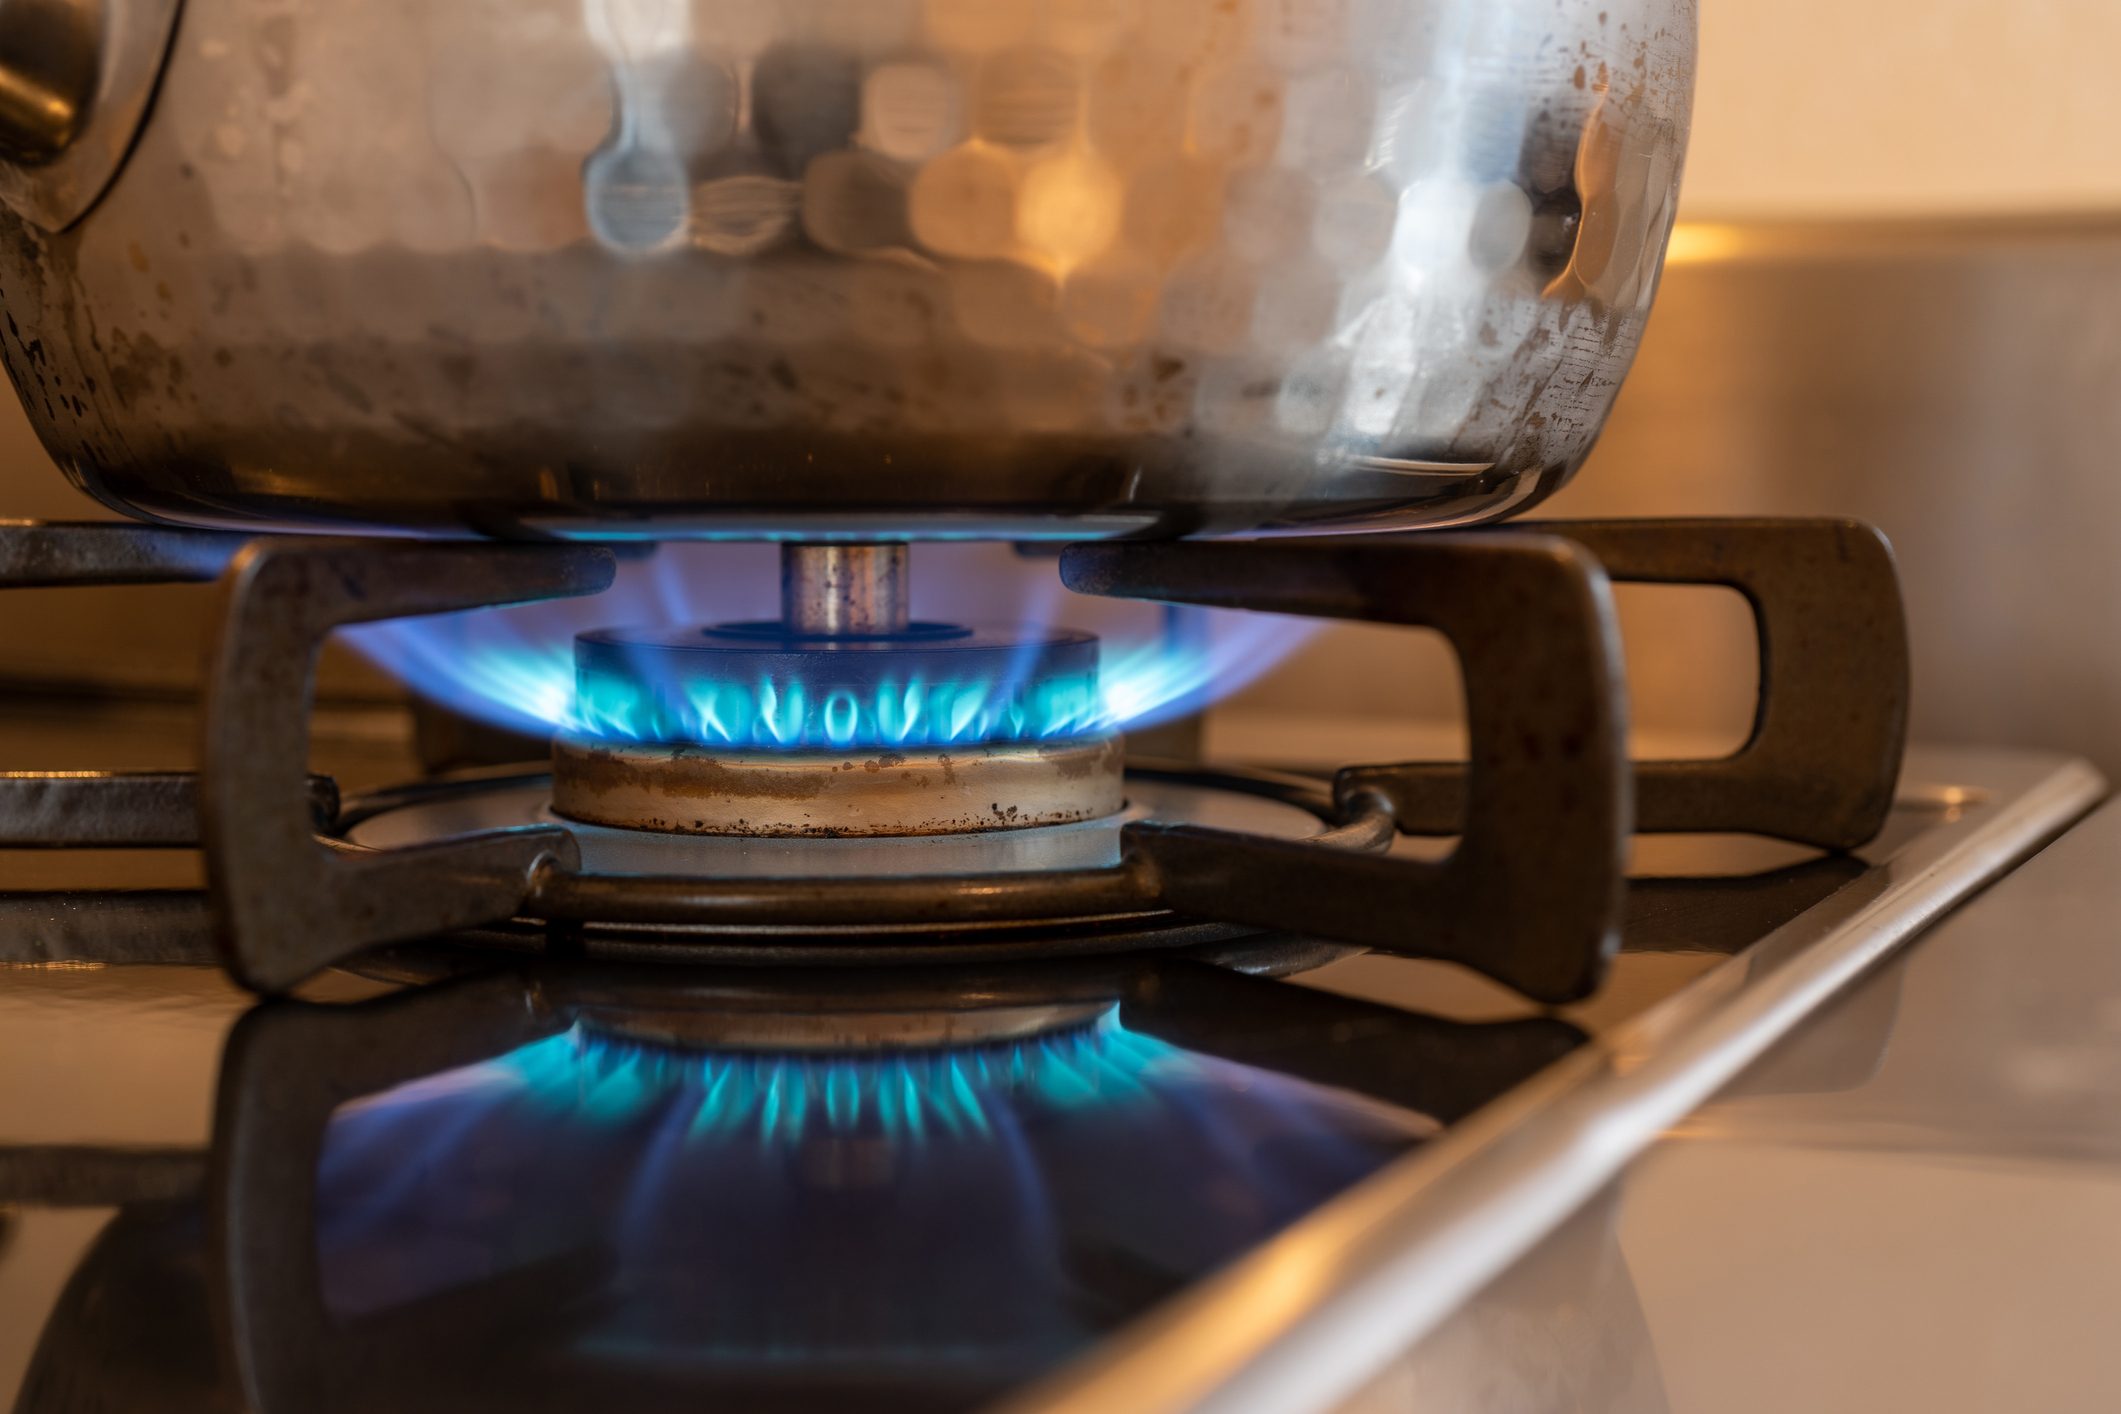 Which Is More Energy Efficient for Cooking: Gas or Induction?